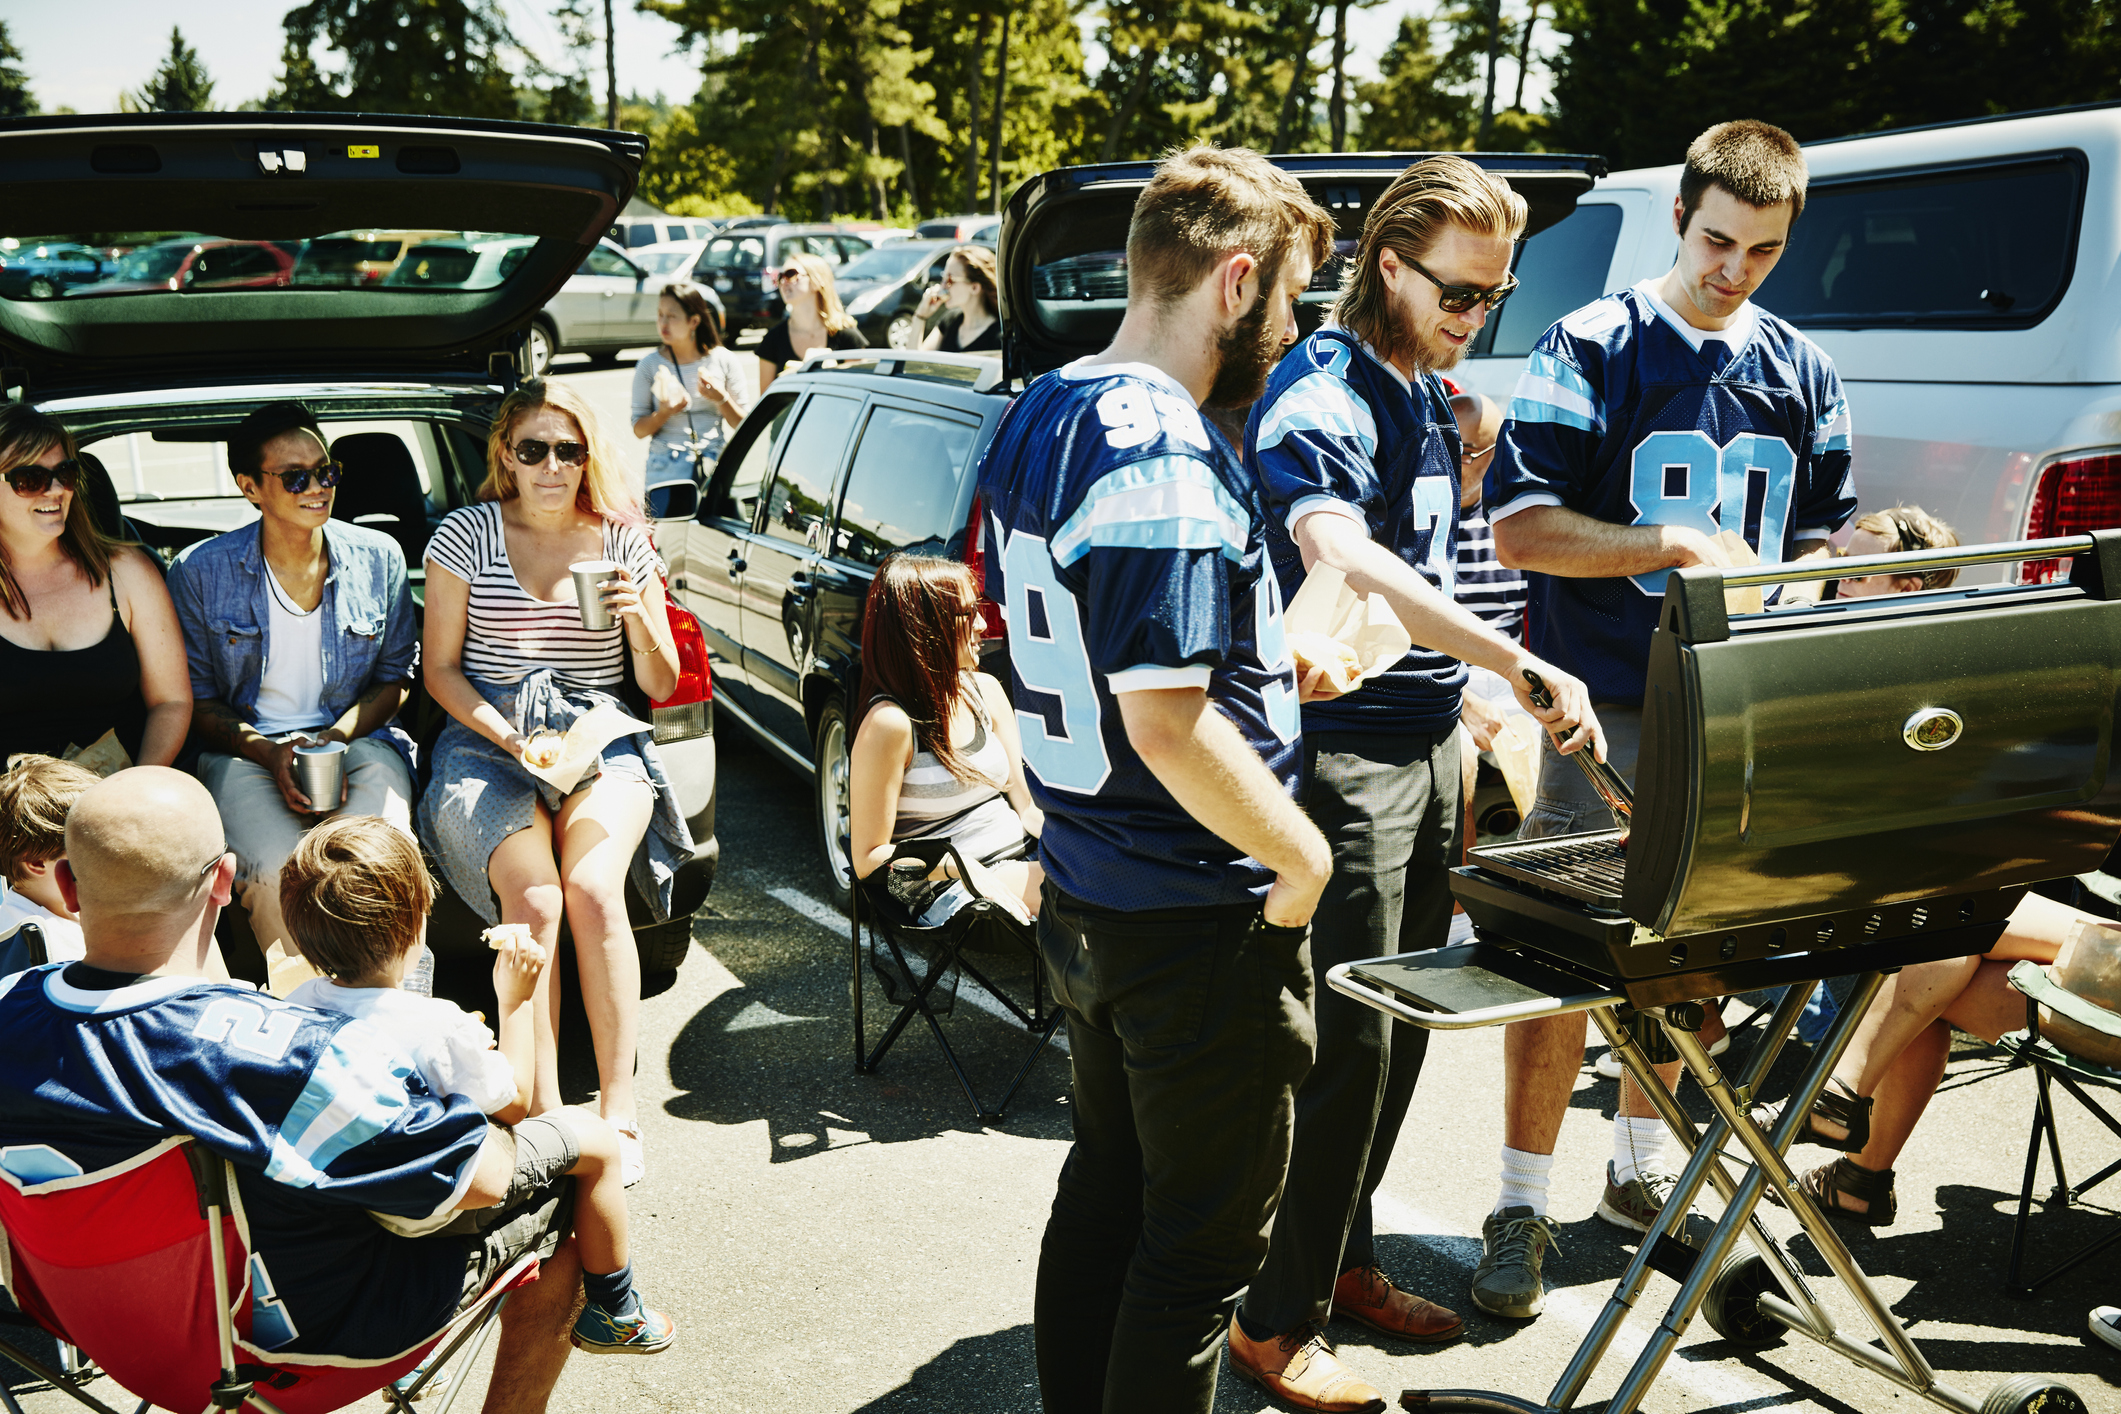 Friends barbecuing during tailgating party in football stadium parking lot